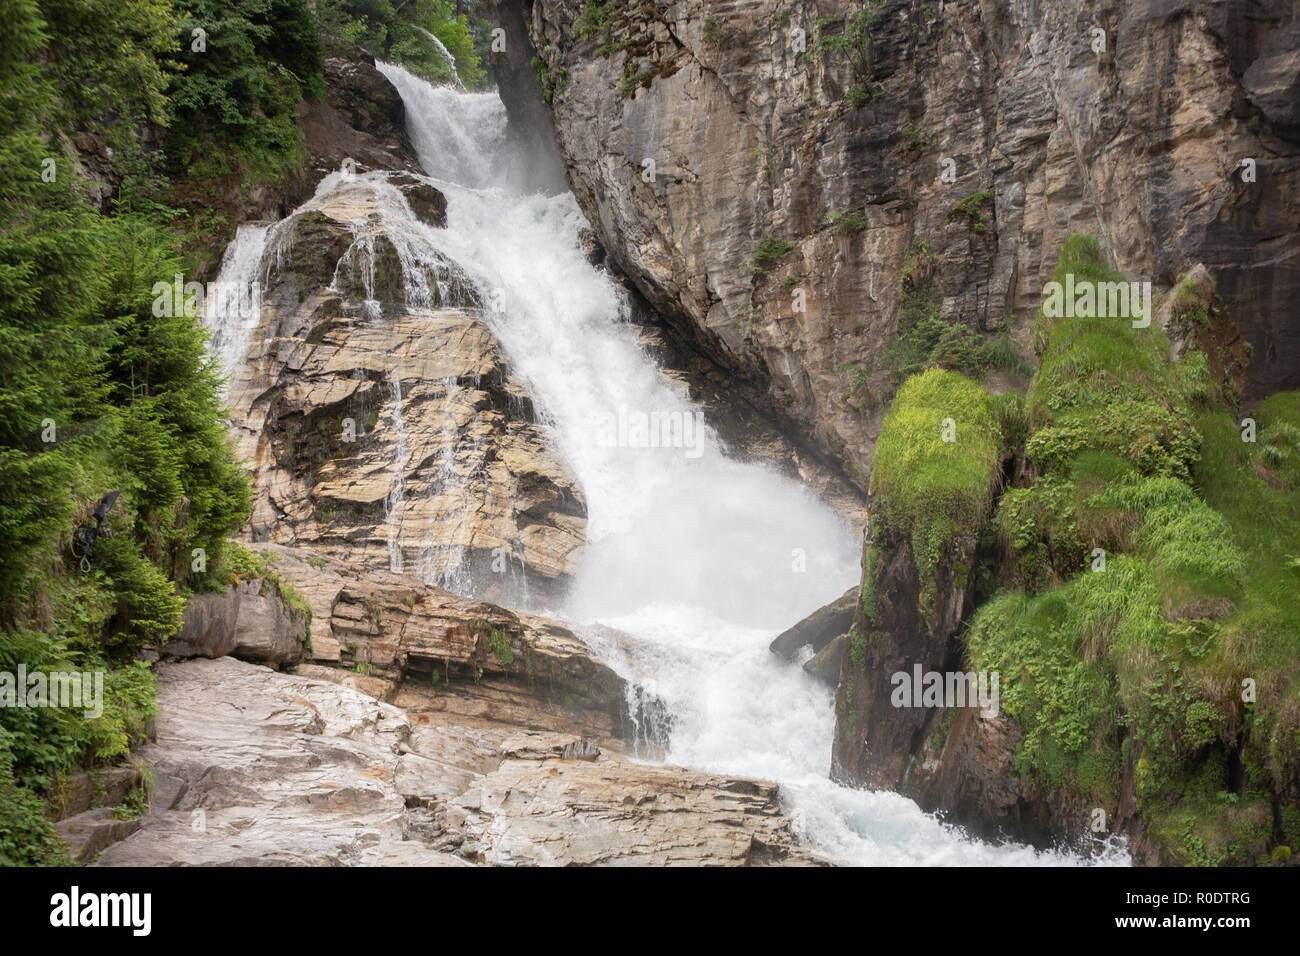 wonderful waterfall in the forest Stock Photo